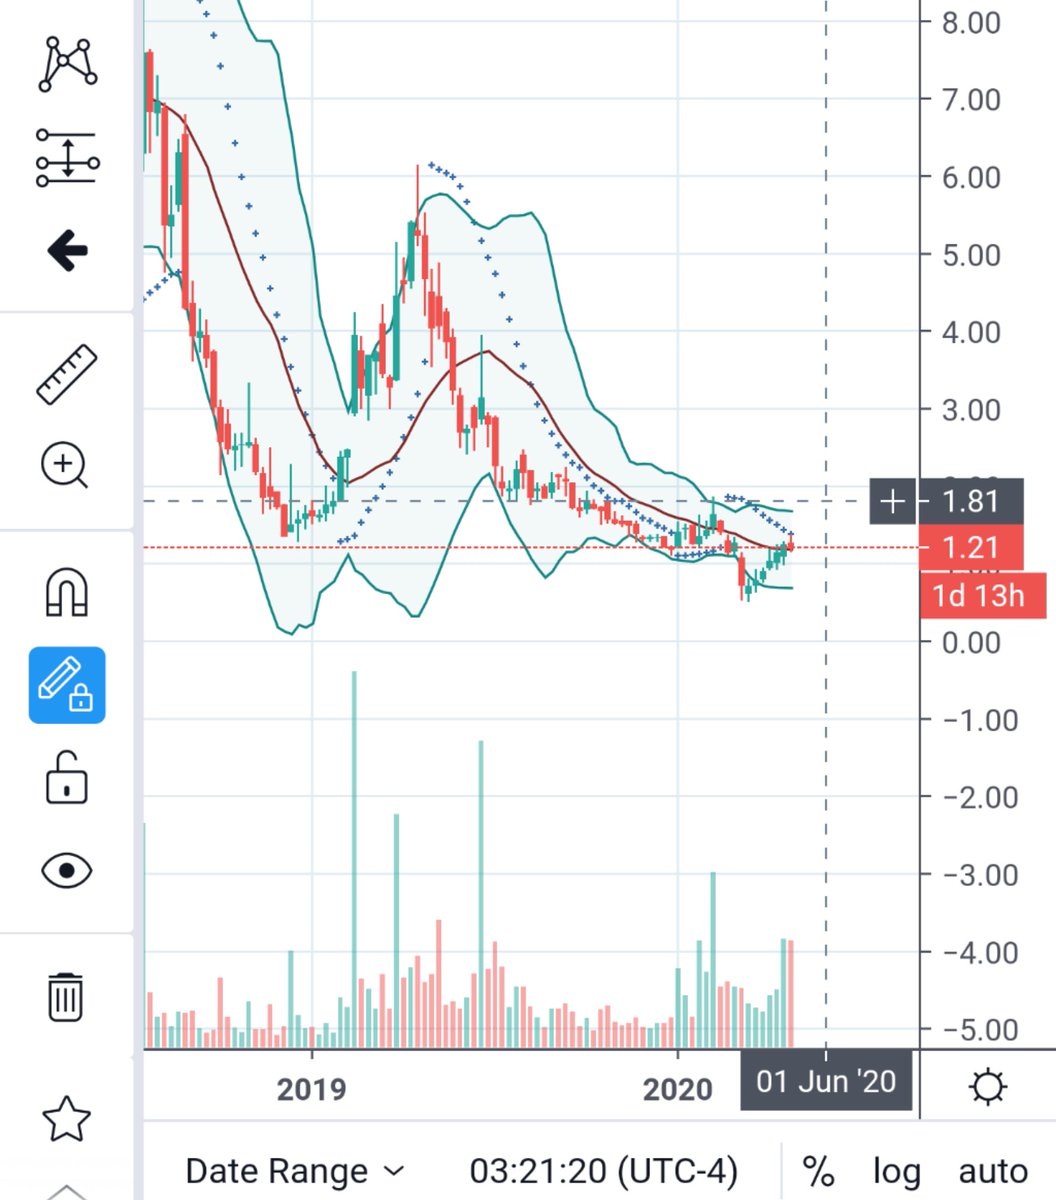  $RIOT should test $1.8 again on this  $BTC move